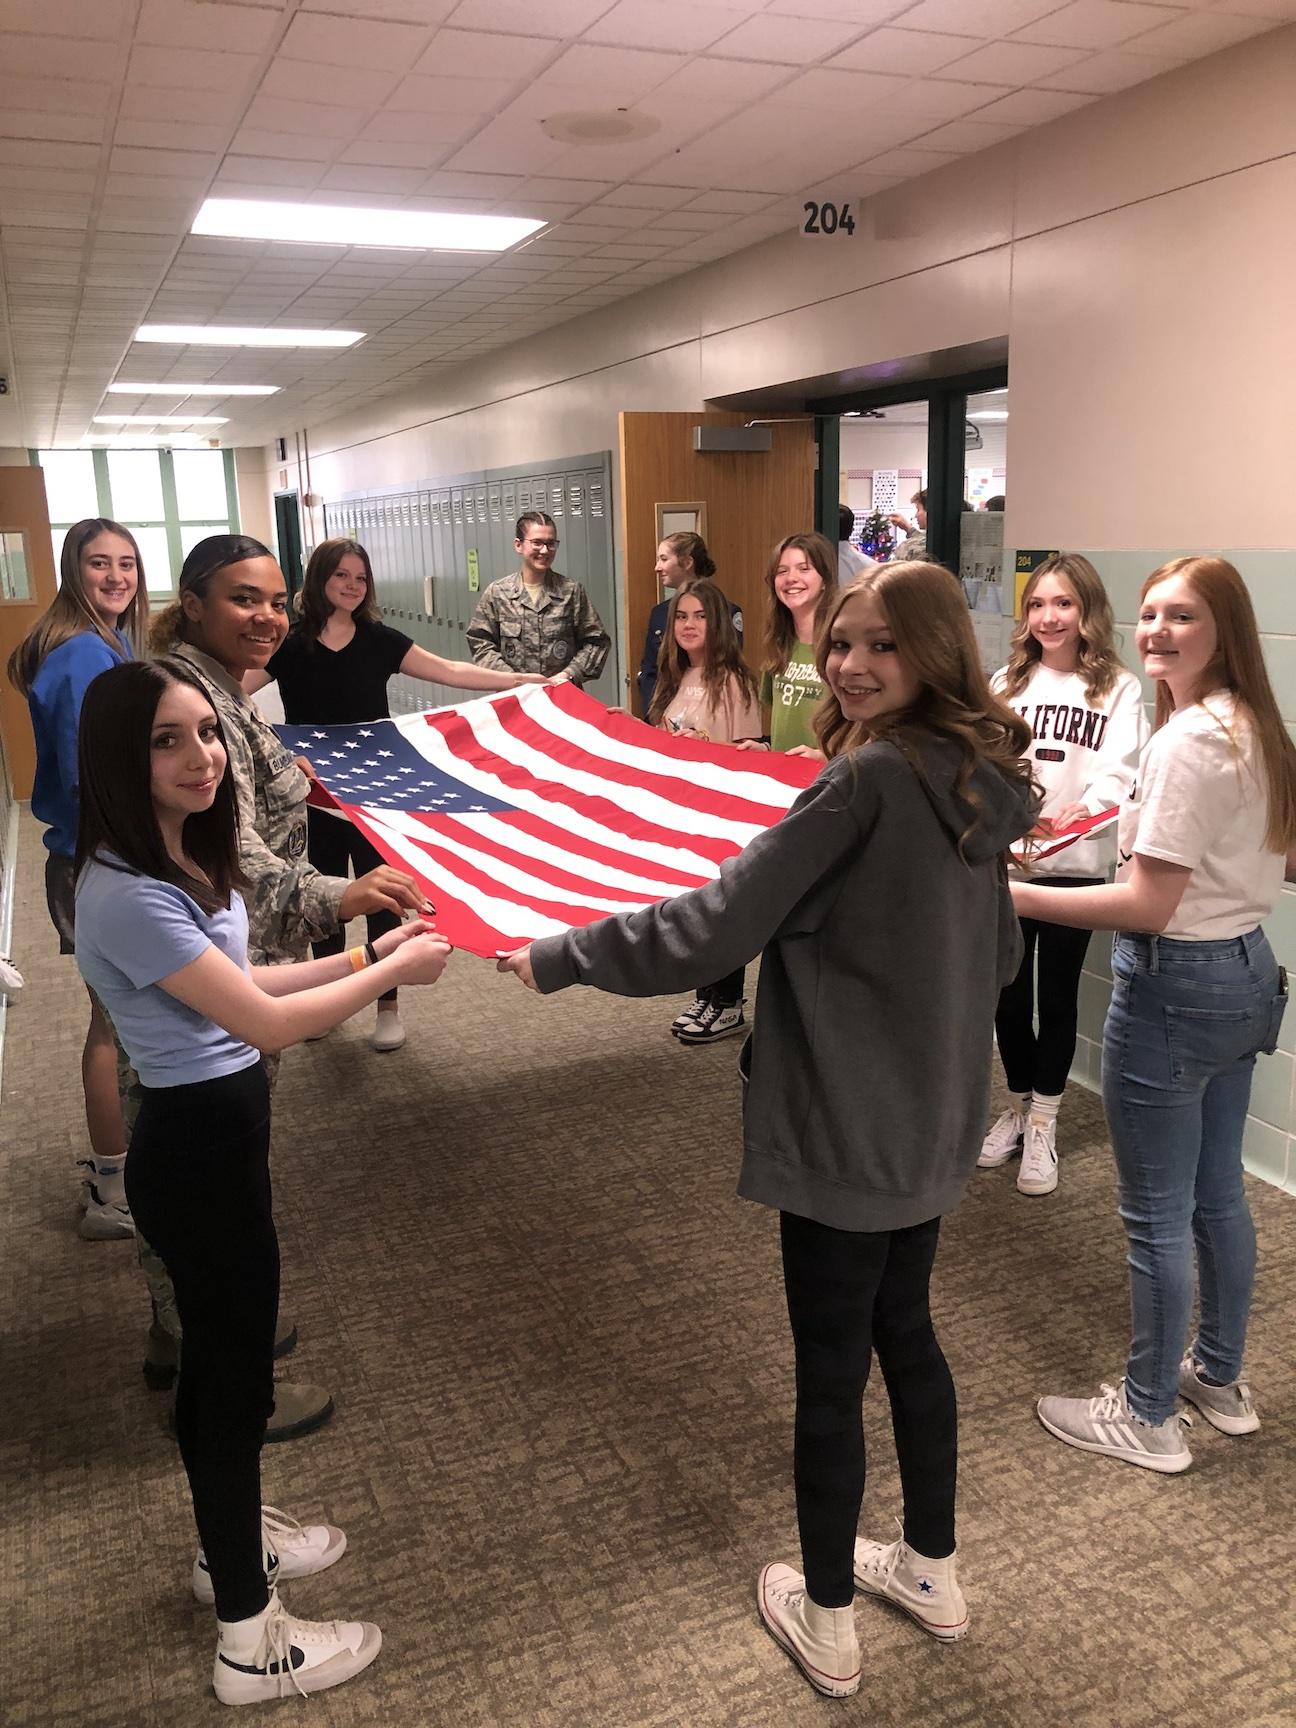 The students receive a lesson on flag handling and folding